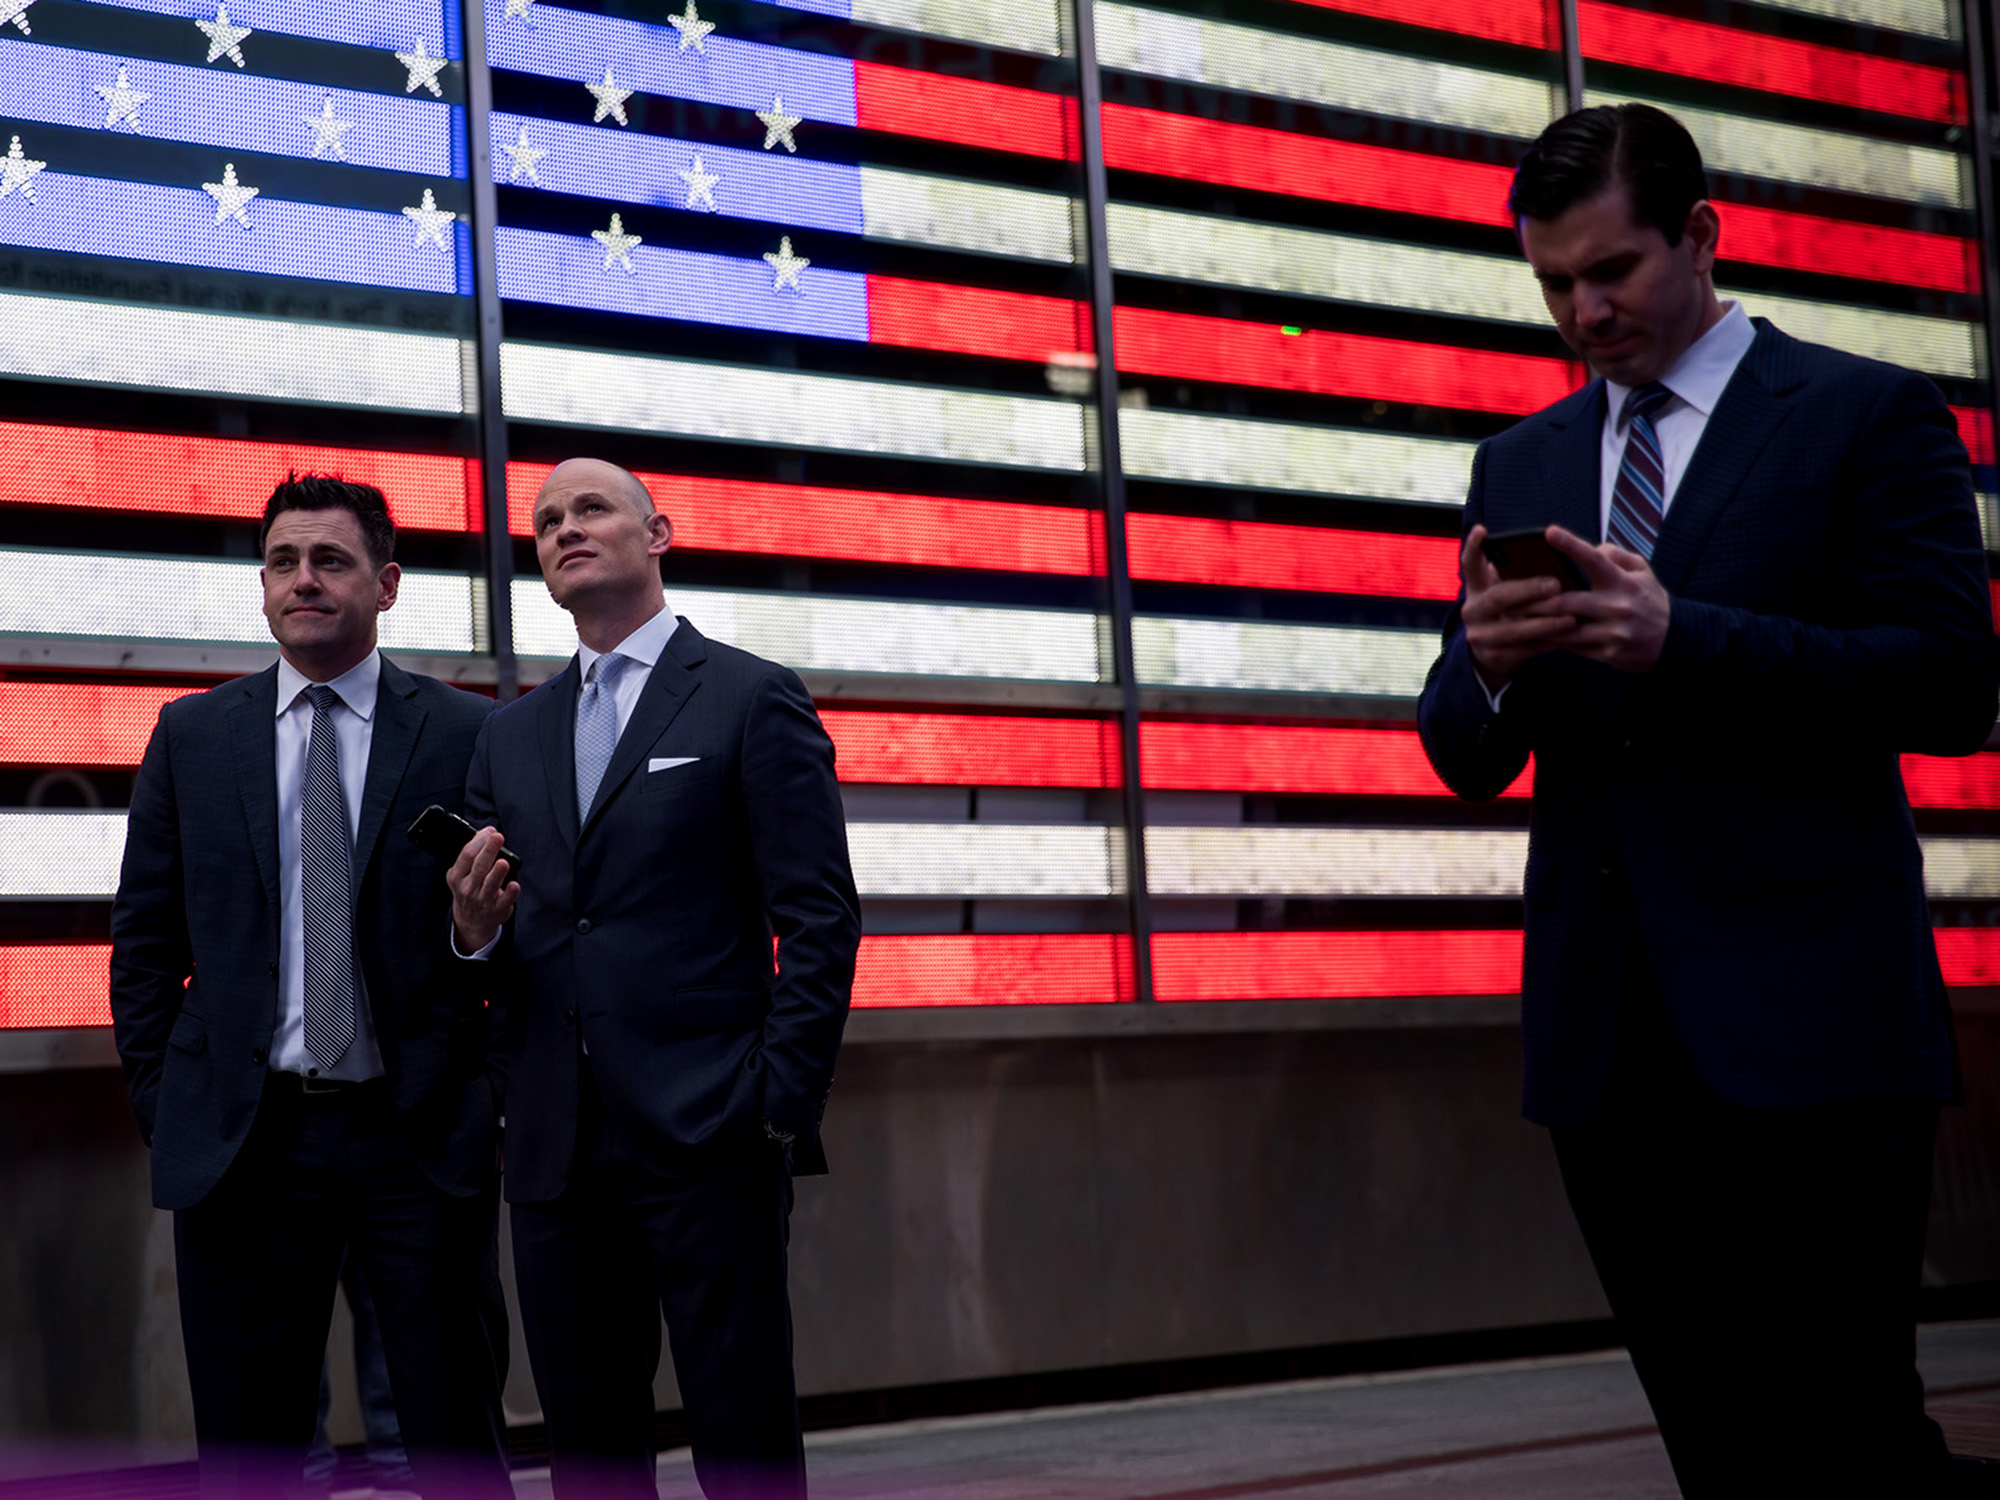 Pedestrians stand in front of an illuminated American flag in the Times Square neighborhood of New York. Photographer: Michael Nagle/Bloomberg